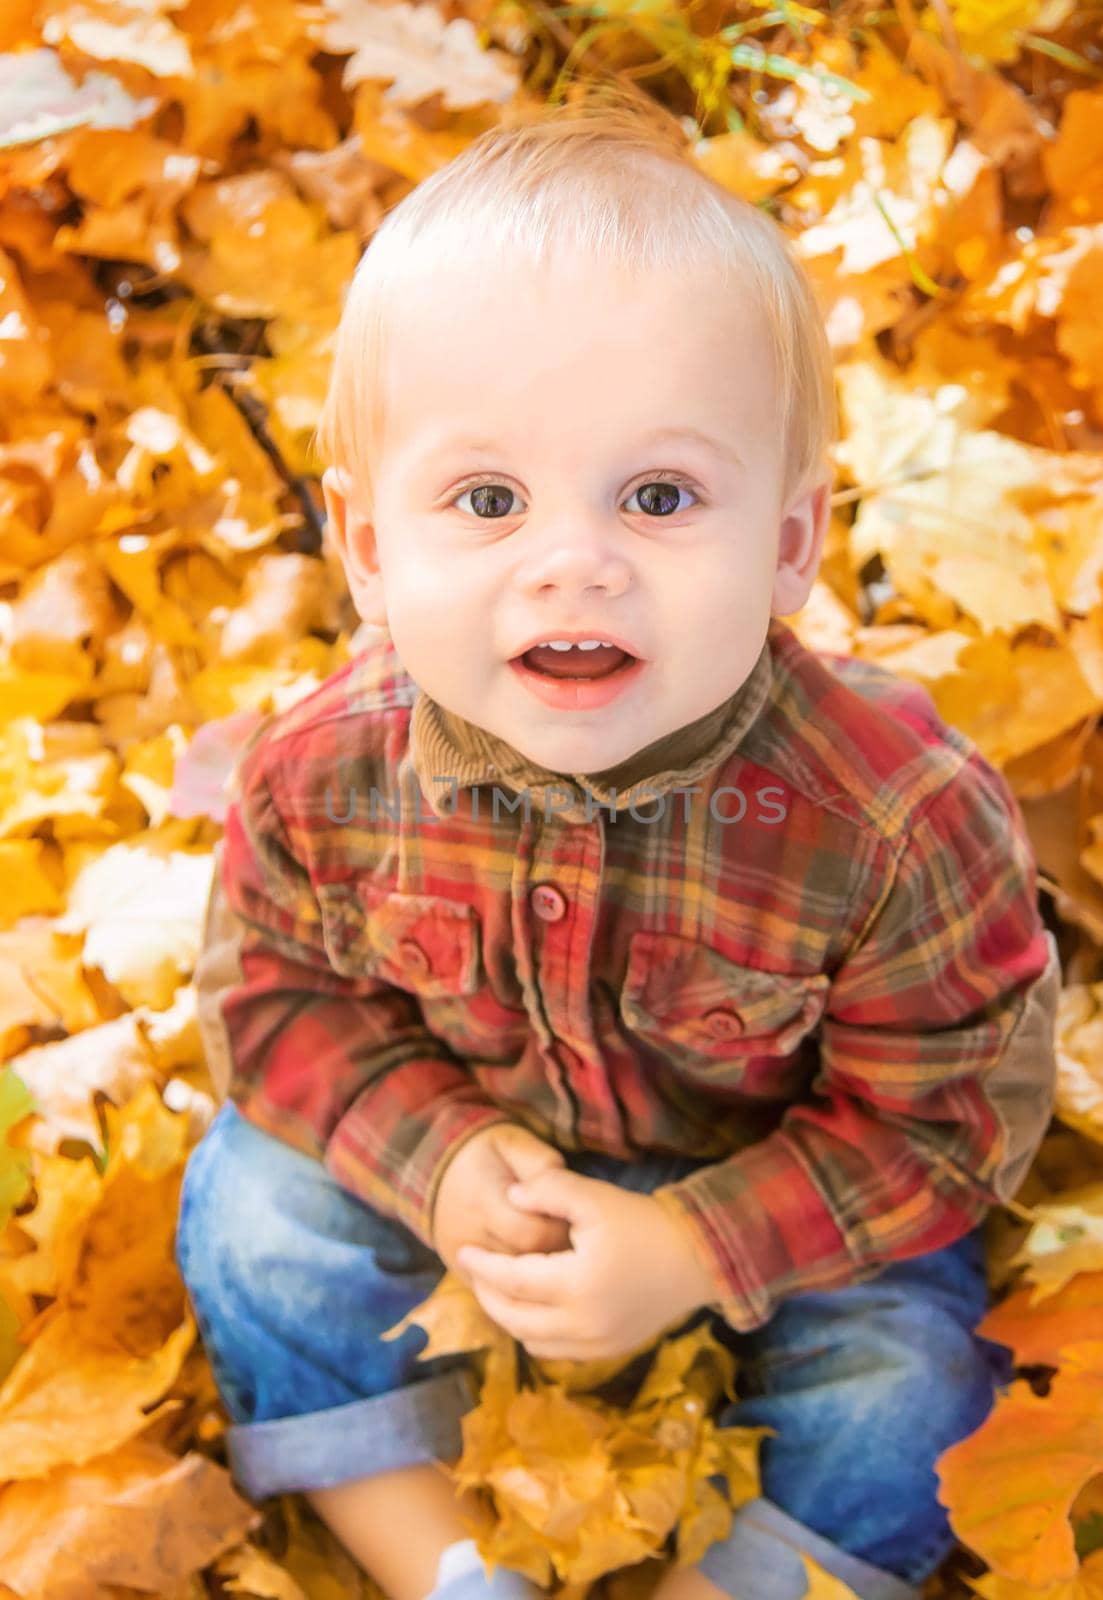 Little kid boy in the park on autumn leaves. Selective focus.